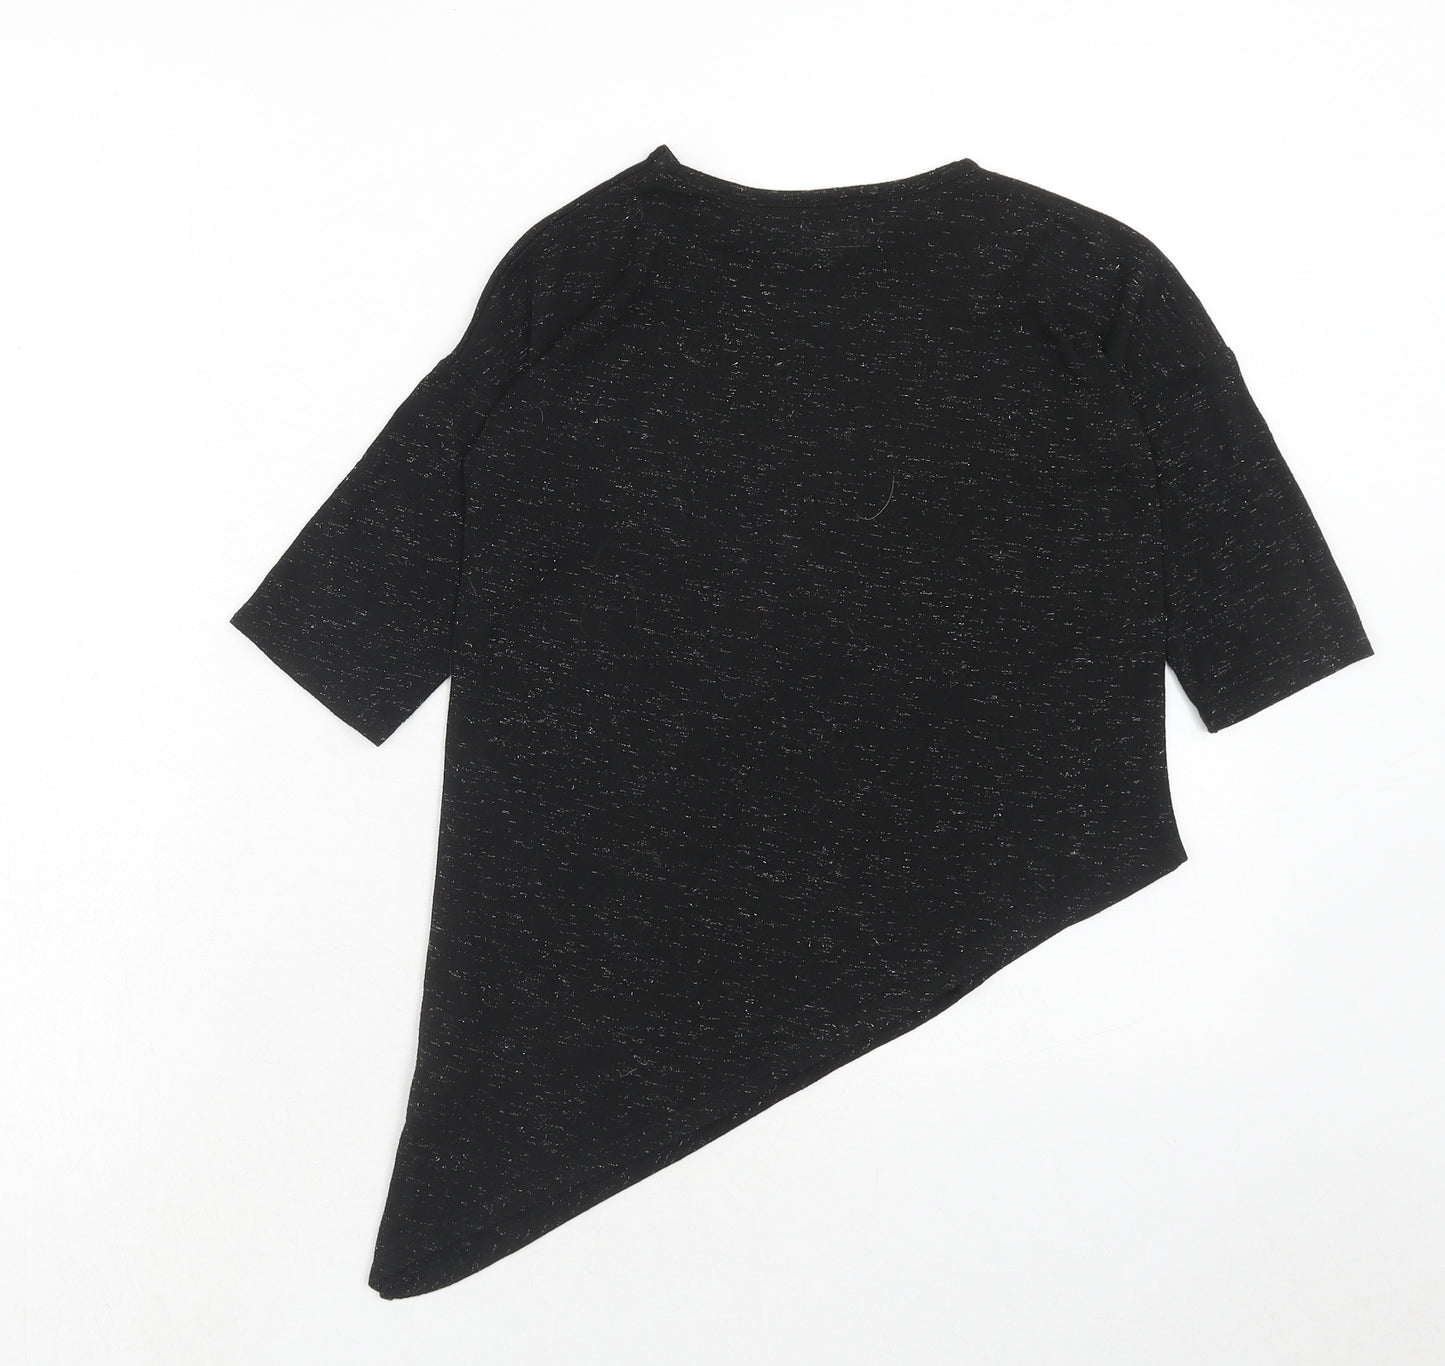 F&F Girls Black Polyester Basic T-Shirt Size 8-9 Years Round Neck Pullover - Aim High And Touch The Stars